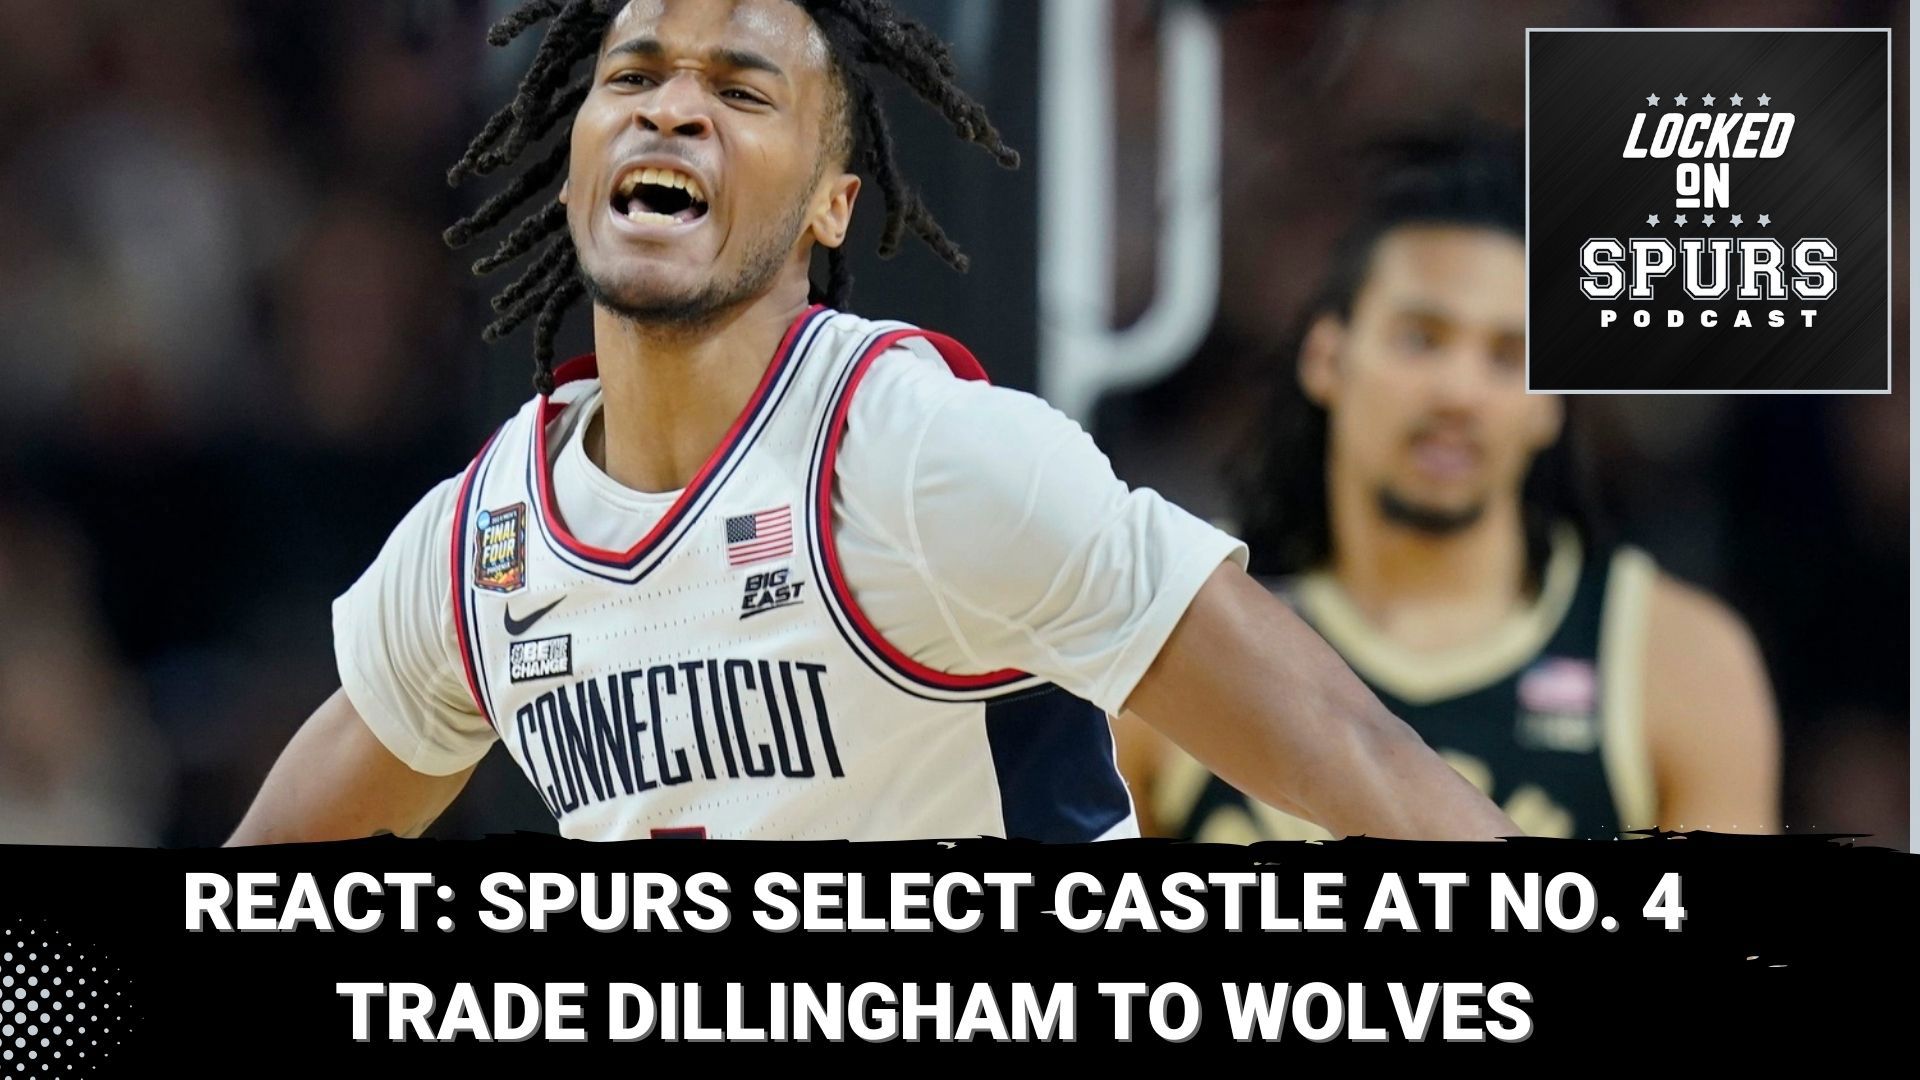 The Spurs get their point guard at No. 4 but flip the No. 8 pick for more draft picks.